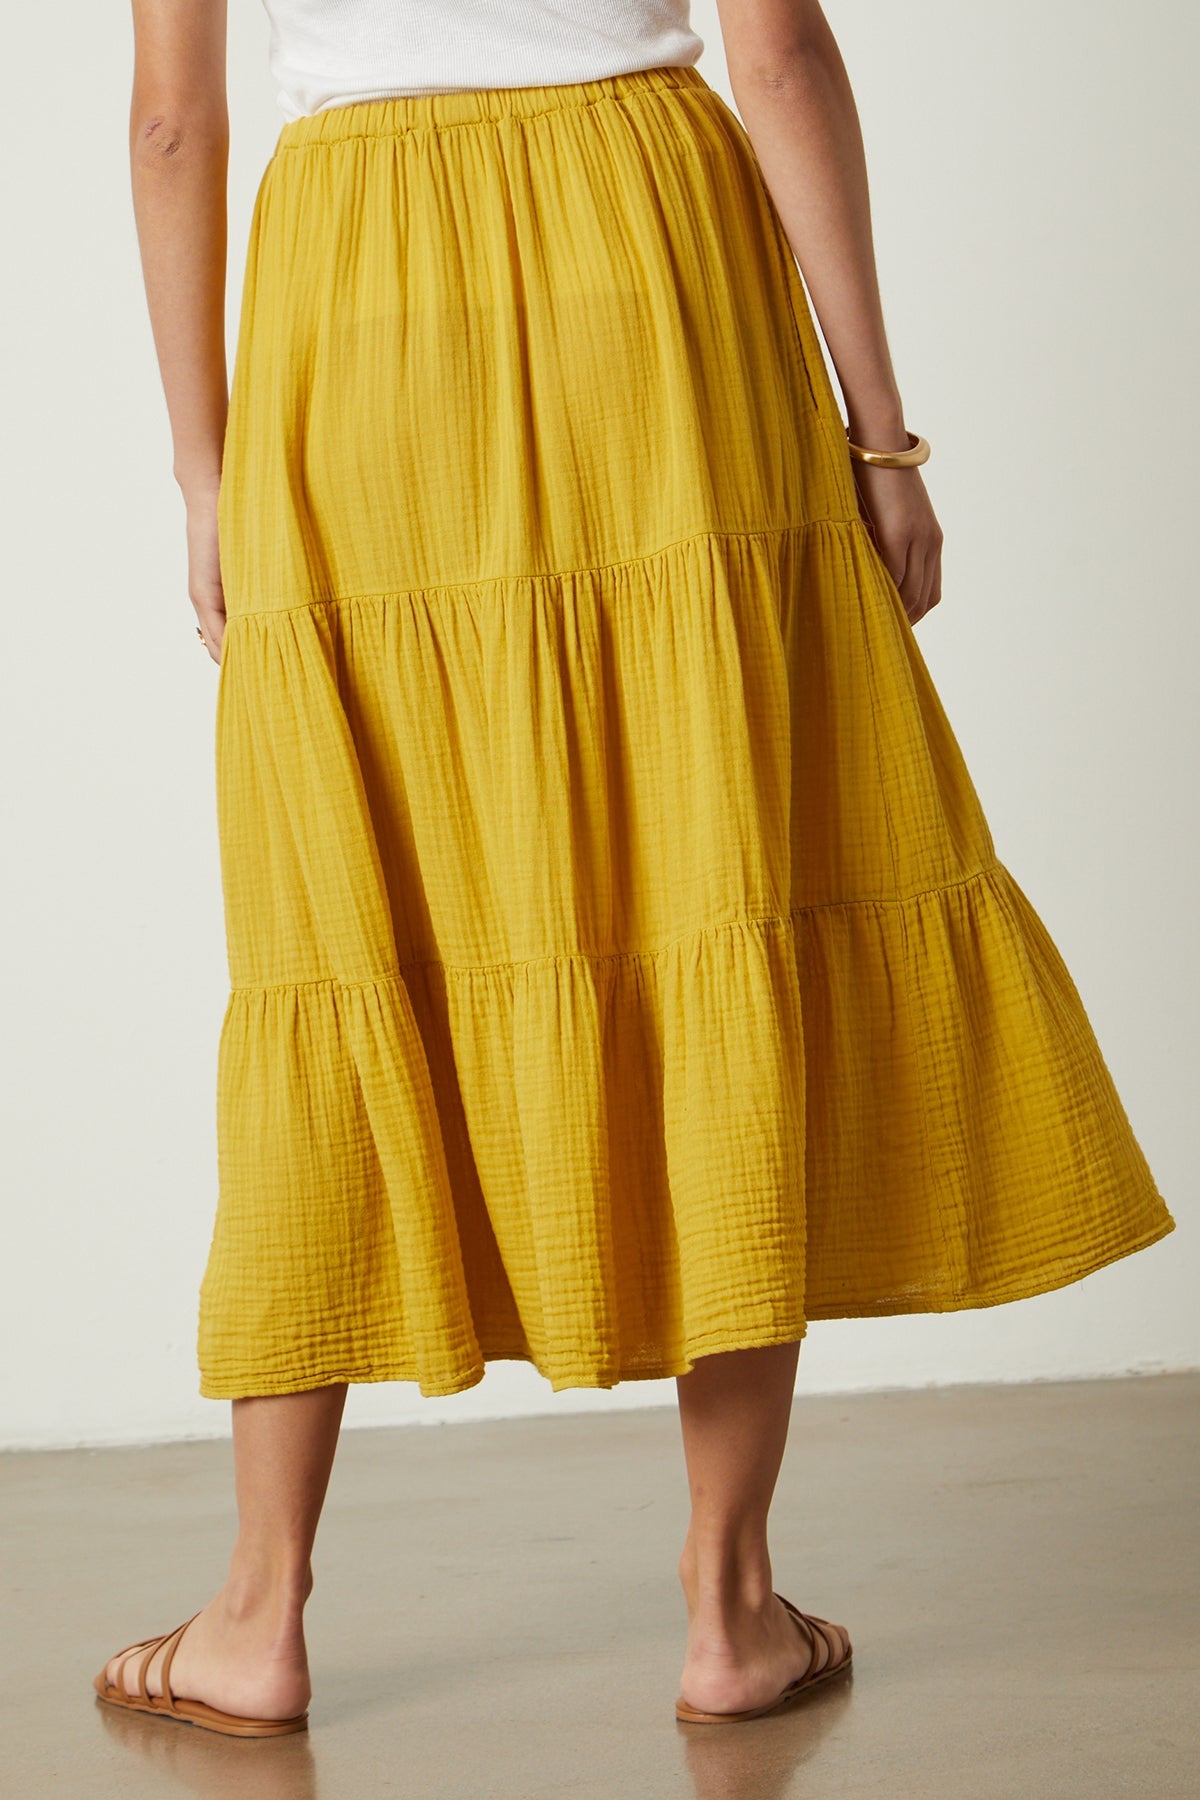 The back view of a woman wearing a yellow Danielle Cotton Gauze Tiered Skirt by Velvet by Graham & Spencer.-35888321462465